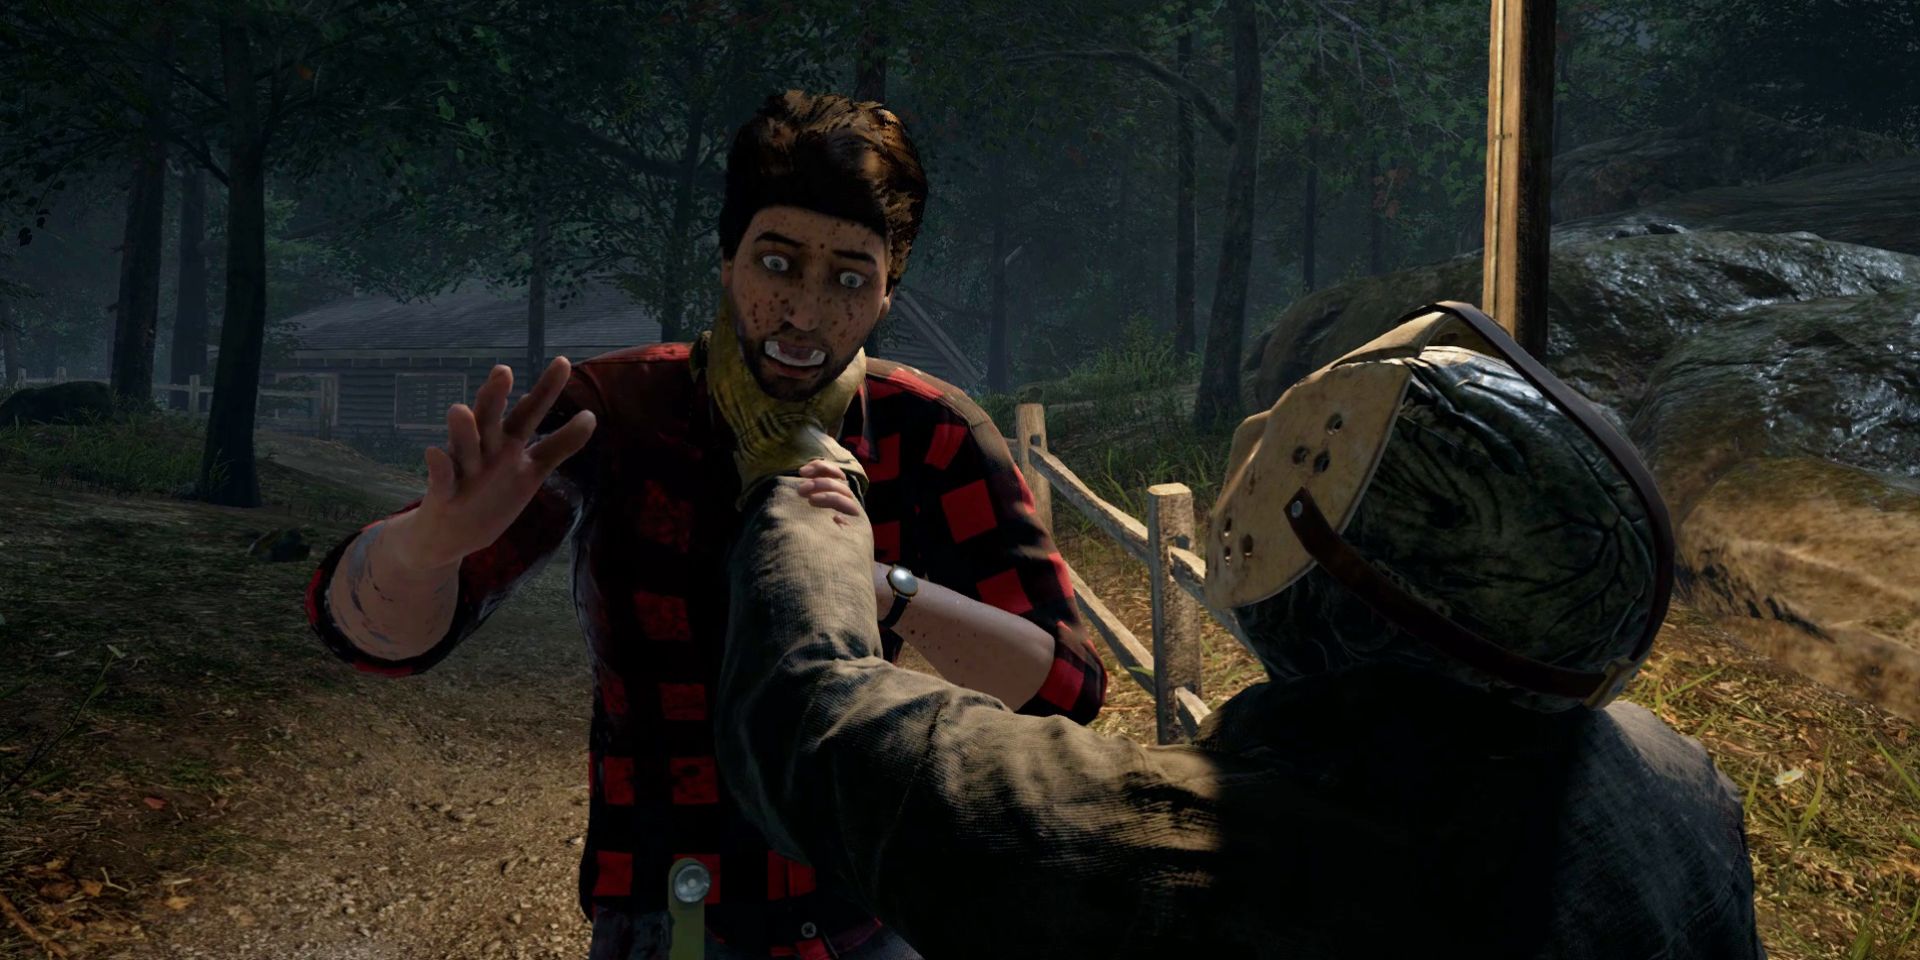 Kenny getting strangled by Jason at night in Friday the 13th: The Game.